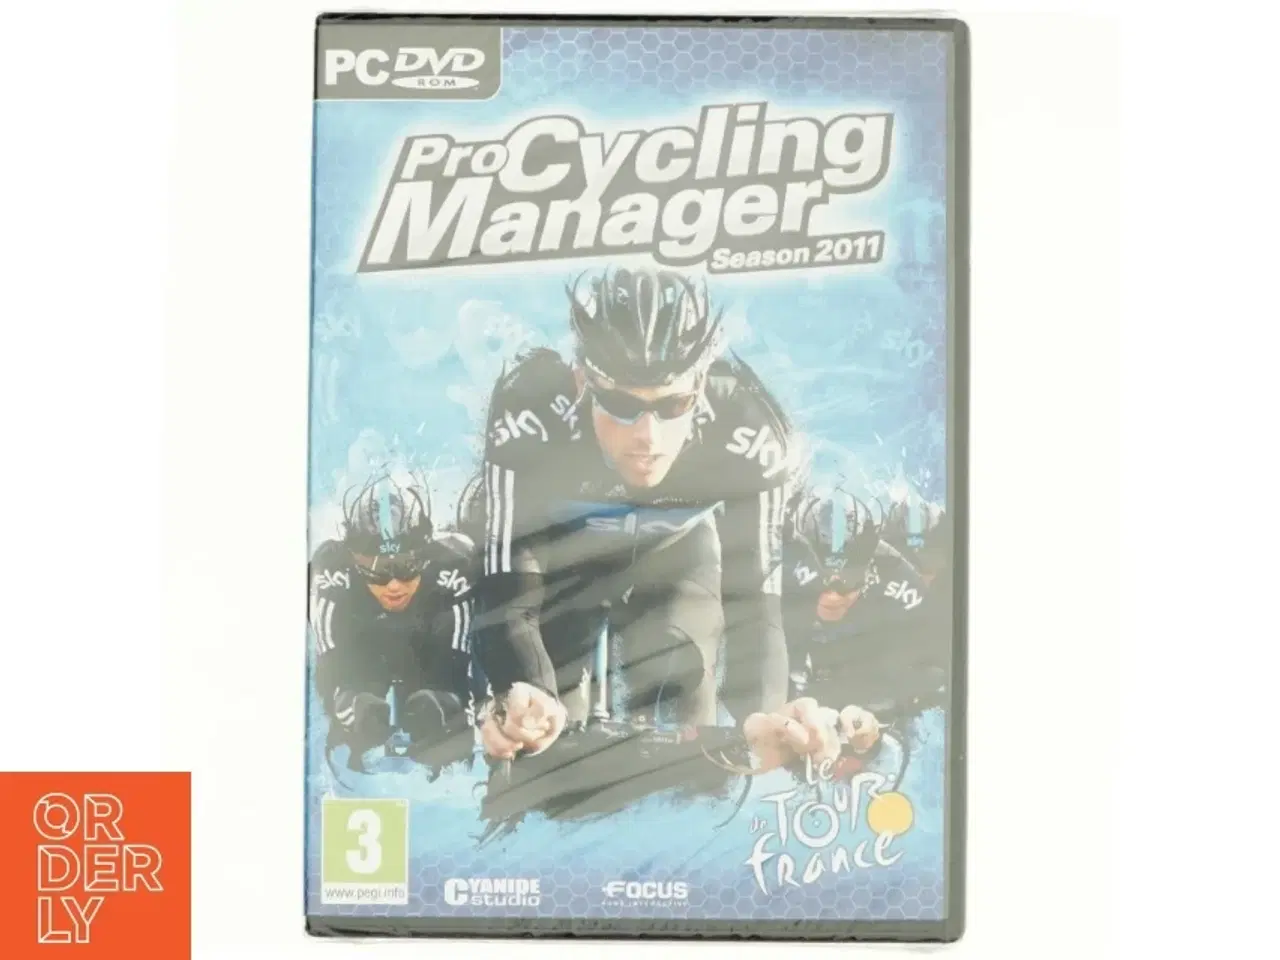 Billede 1 - Pro Cycling Manager